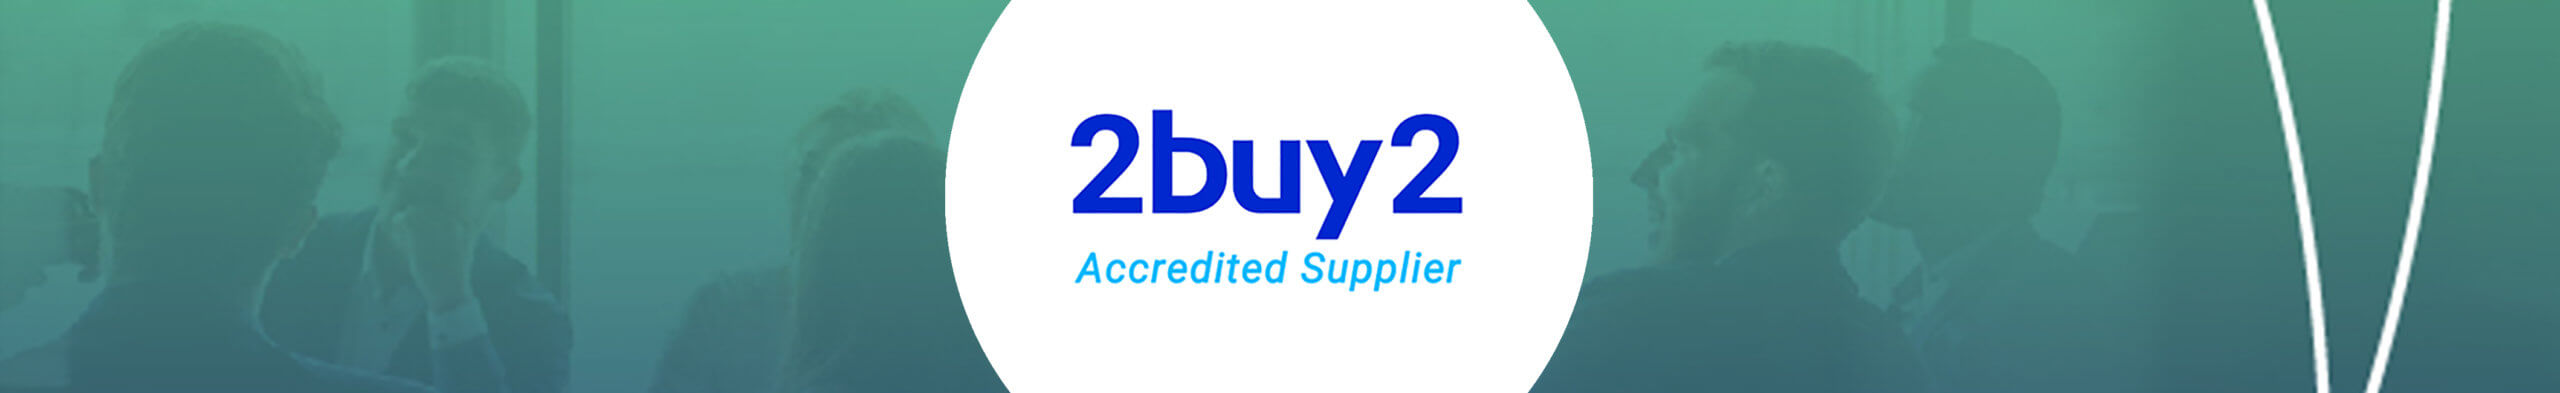 2buy2 Accredited Supplier